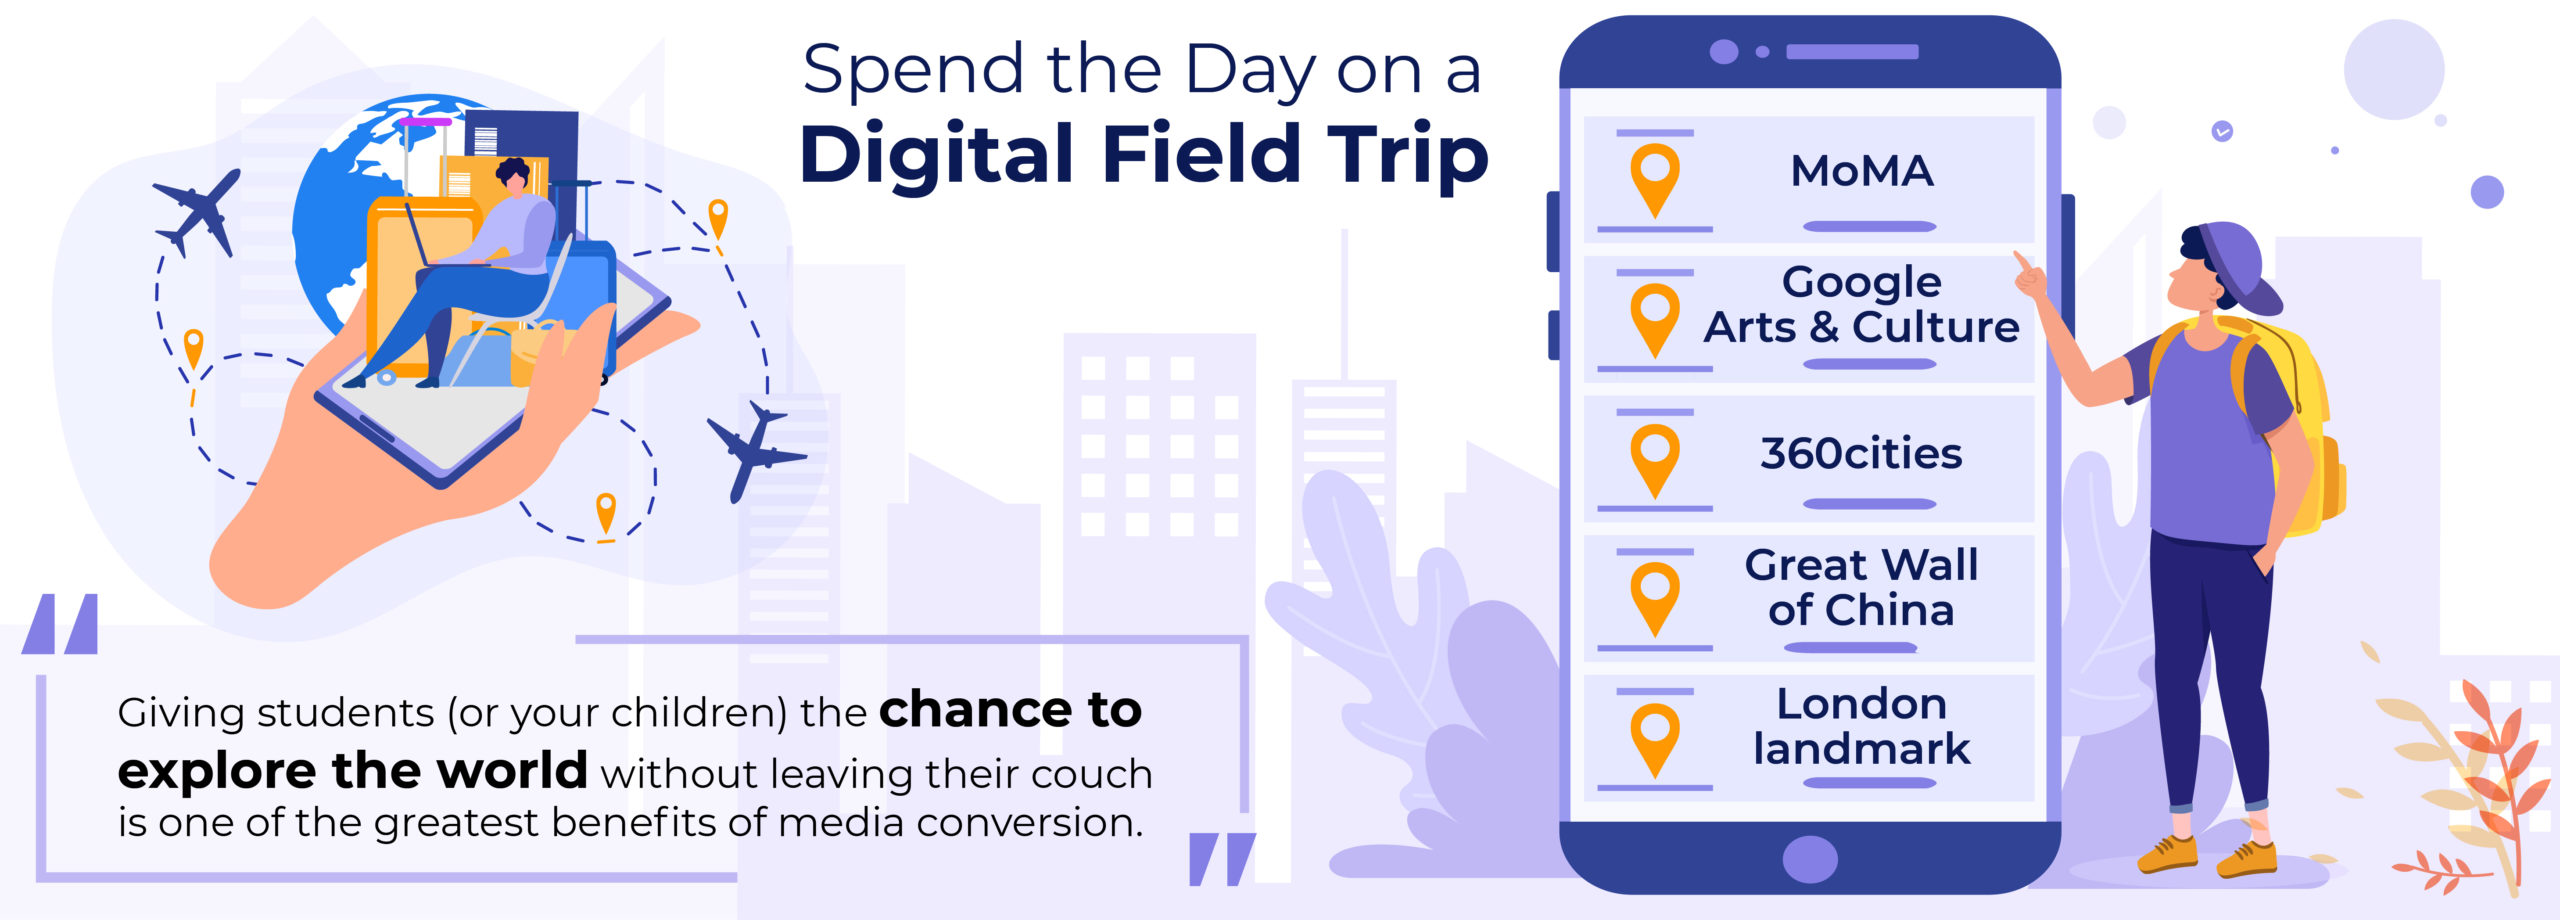 Spend the Day on a Digital Field Trip